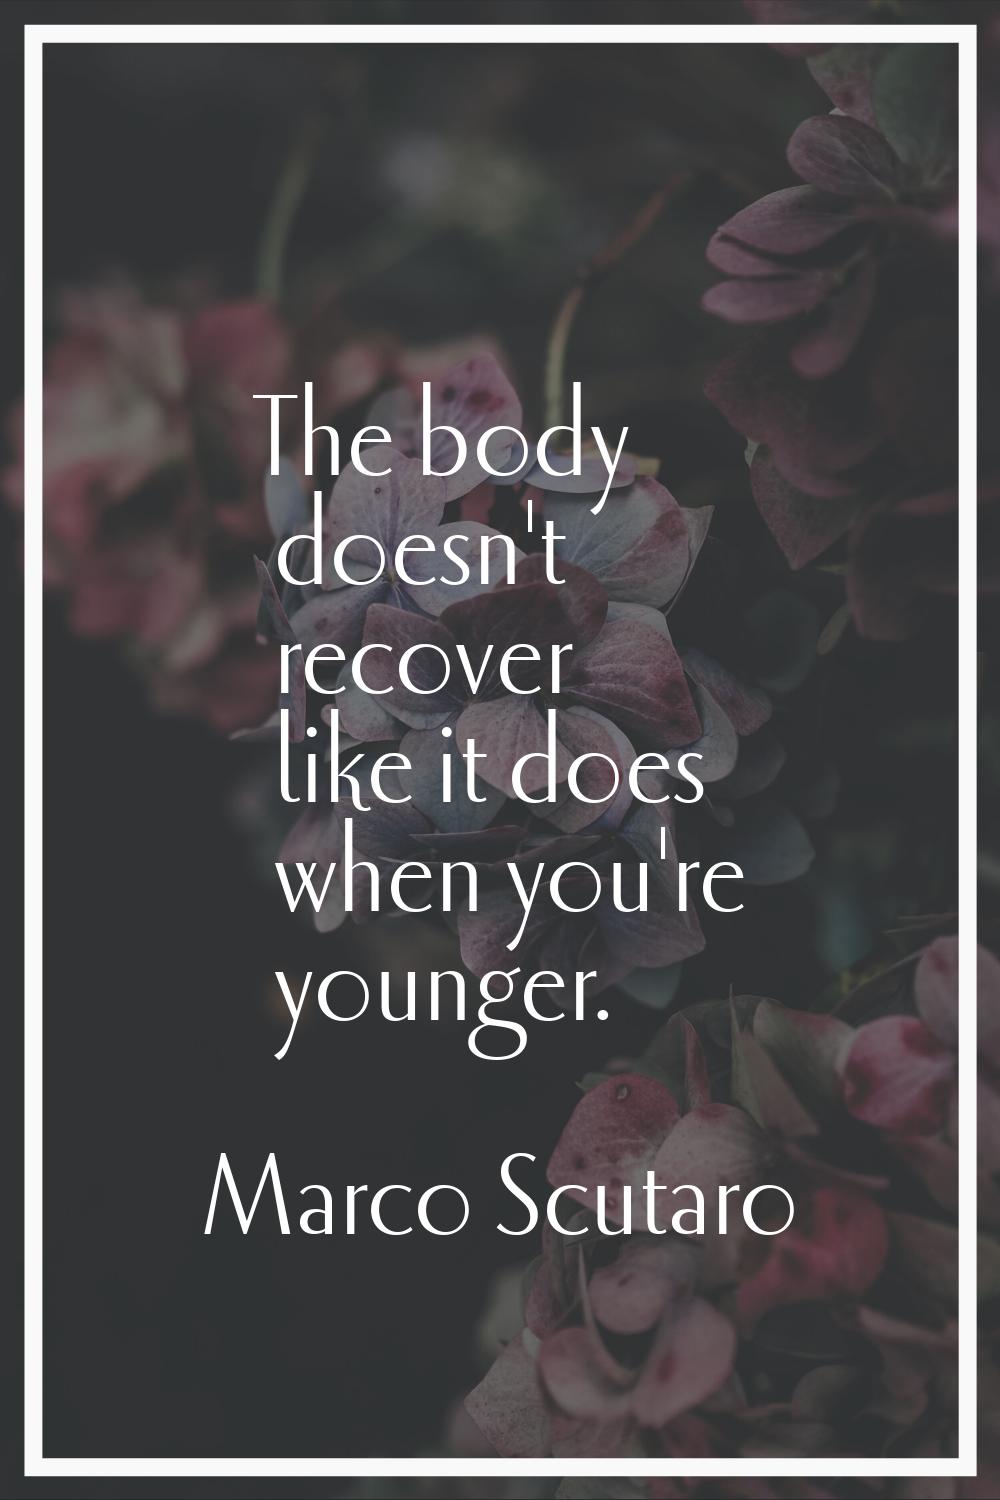 The body doesn't recover like it does when you're younger.